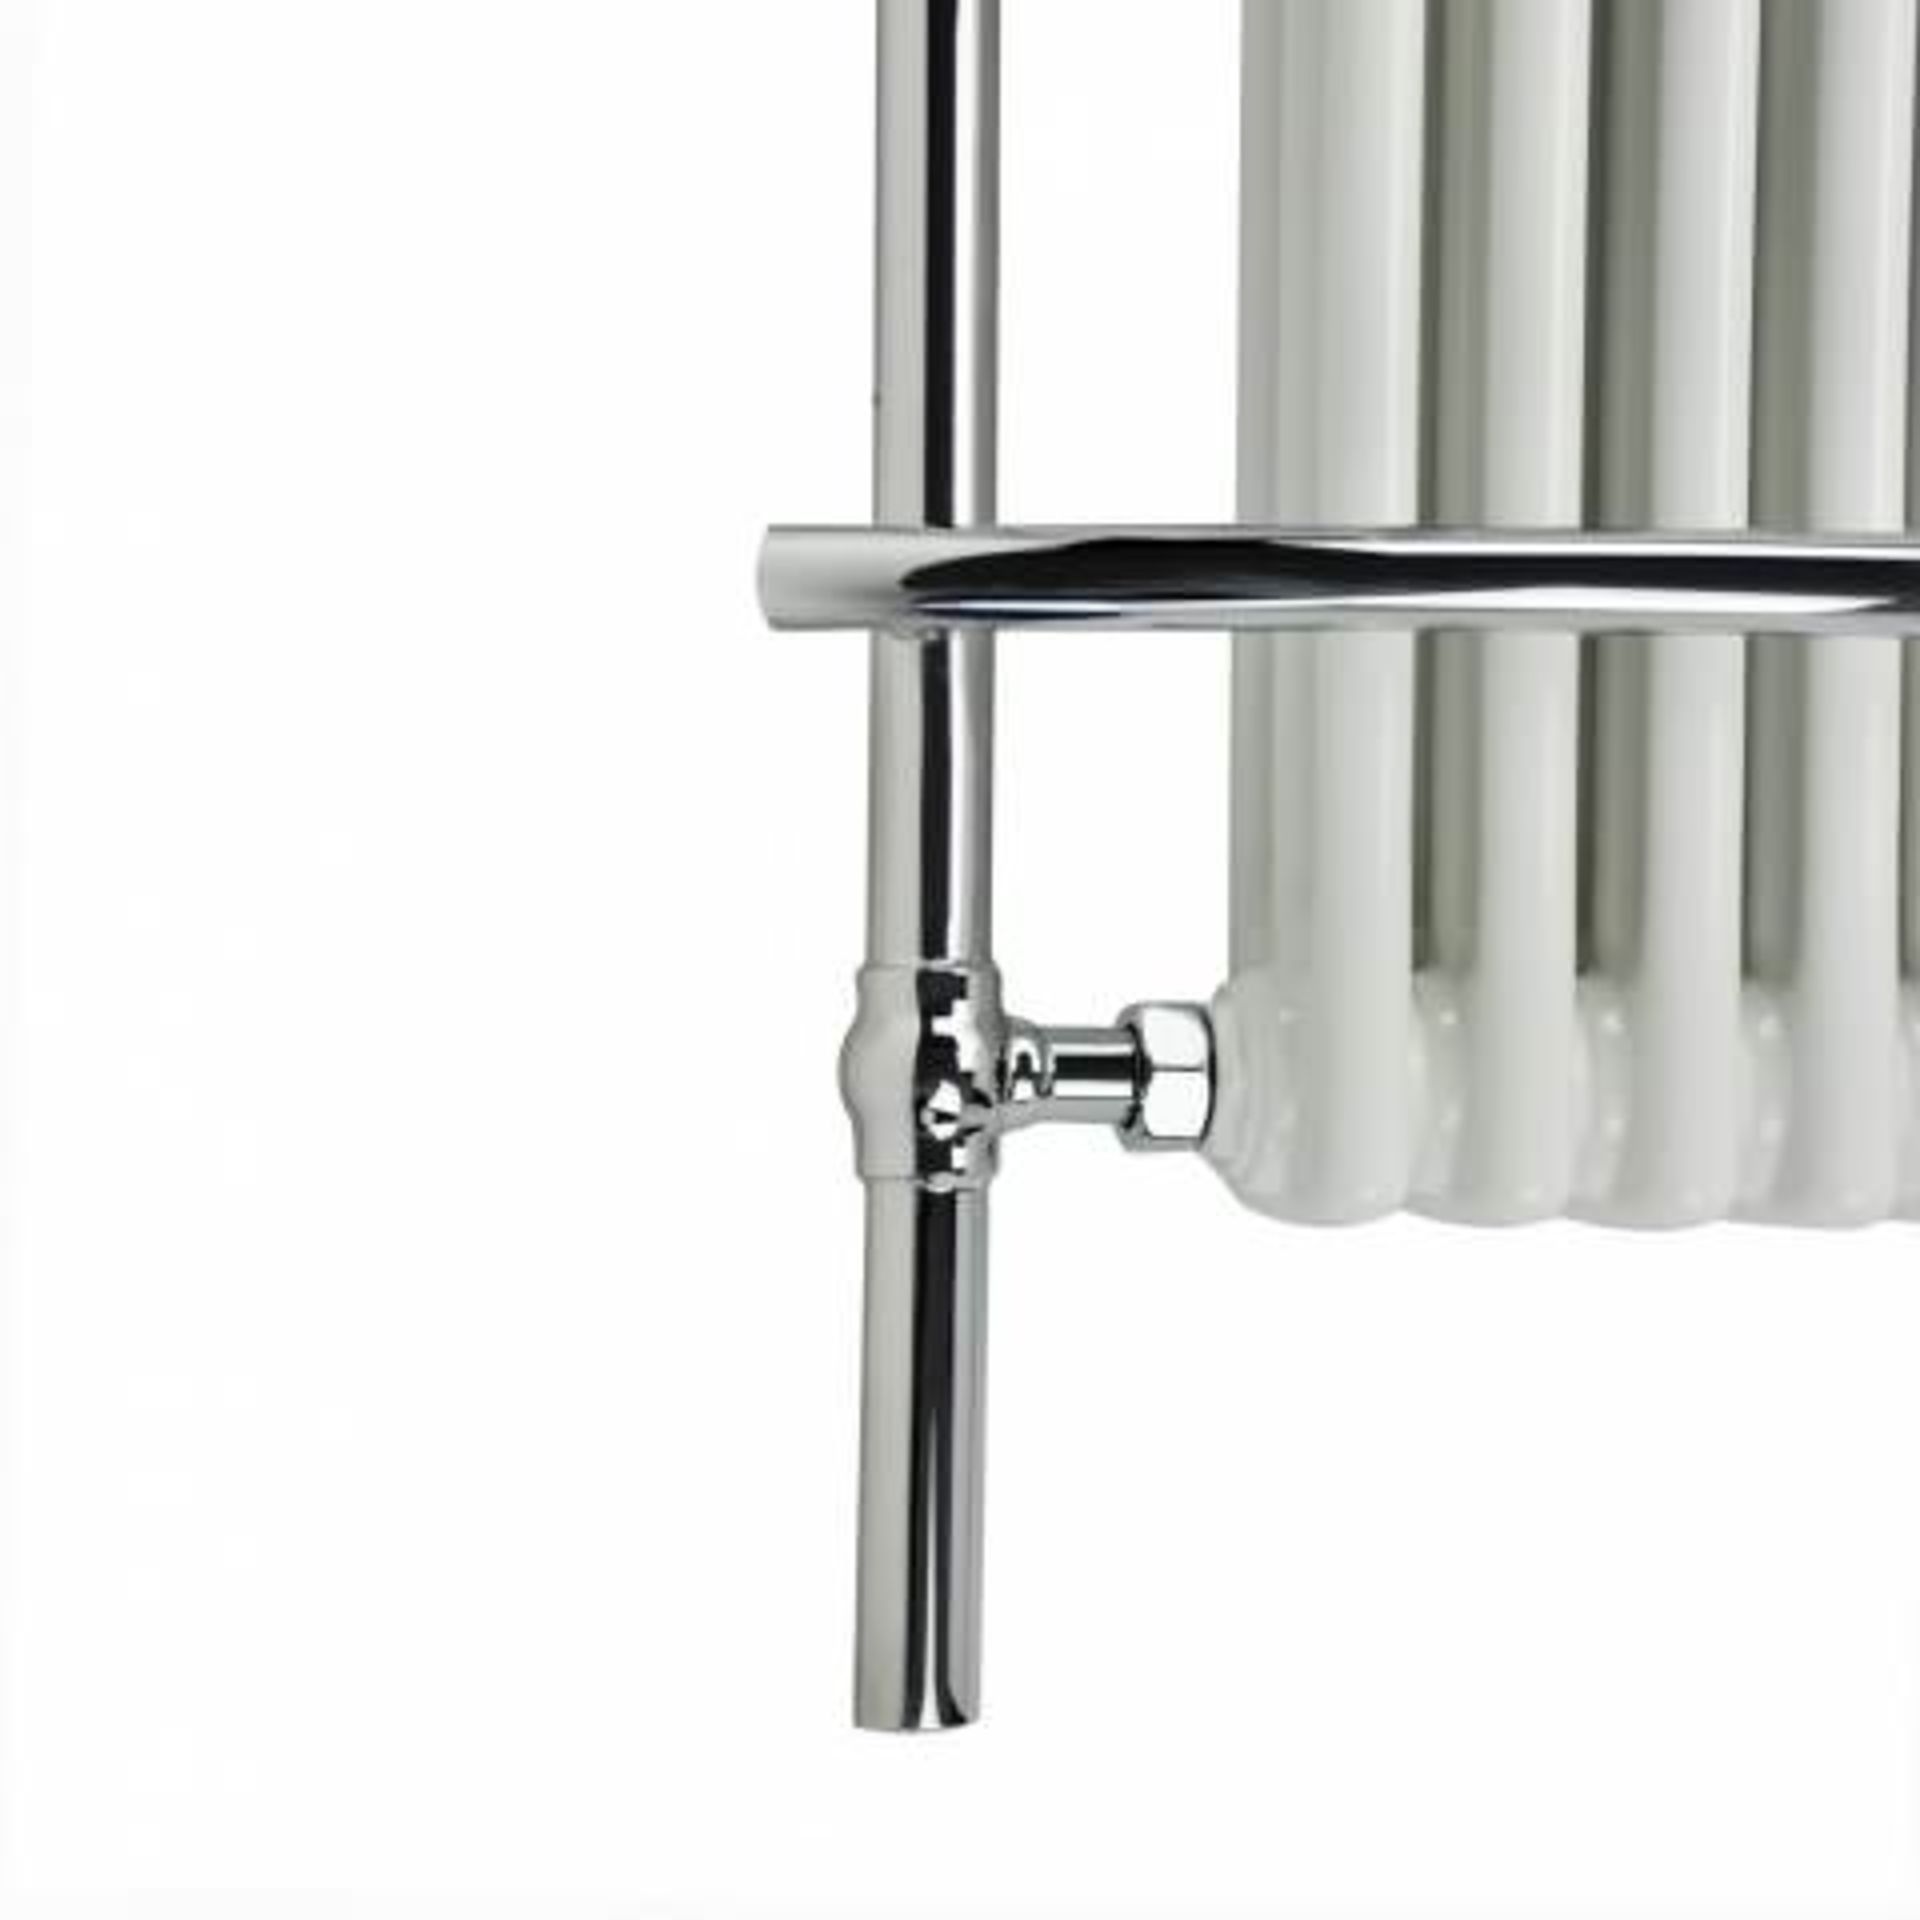 (H12) 1000x635mm Traditional White Wall Mounted Towel Rail Radiator - Victoria Premium. RRP £719.99. - Image 5 of 5